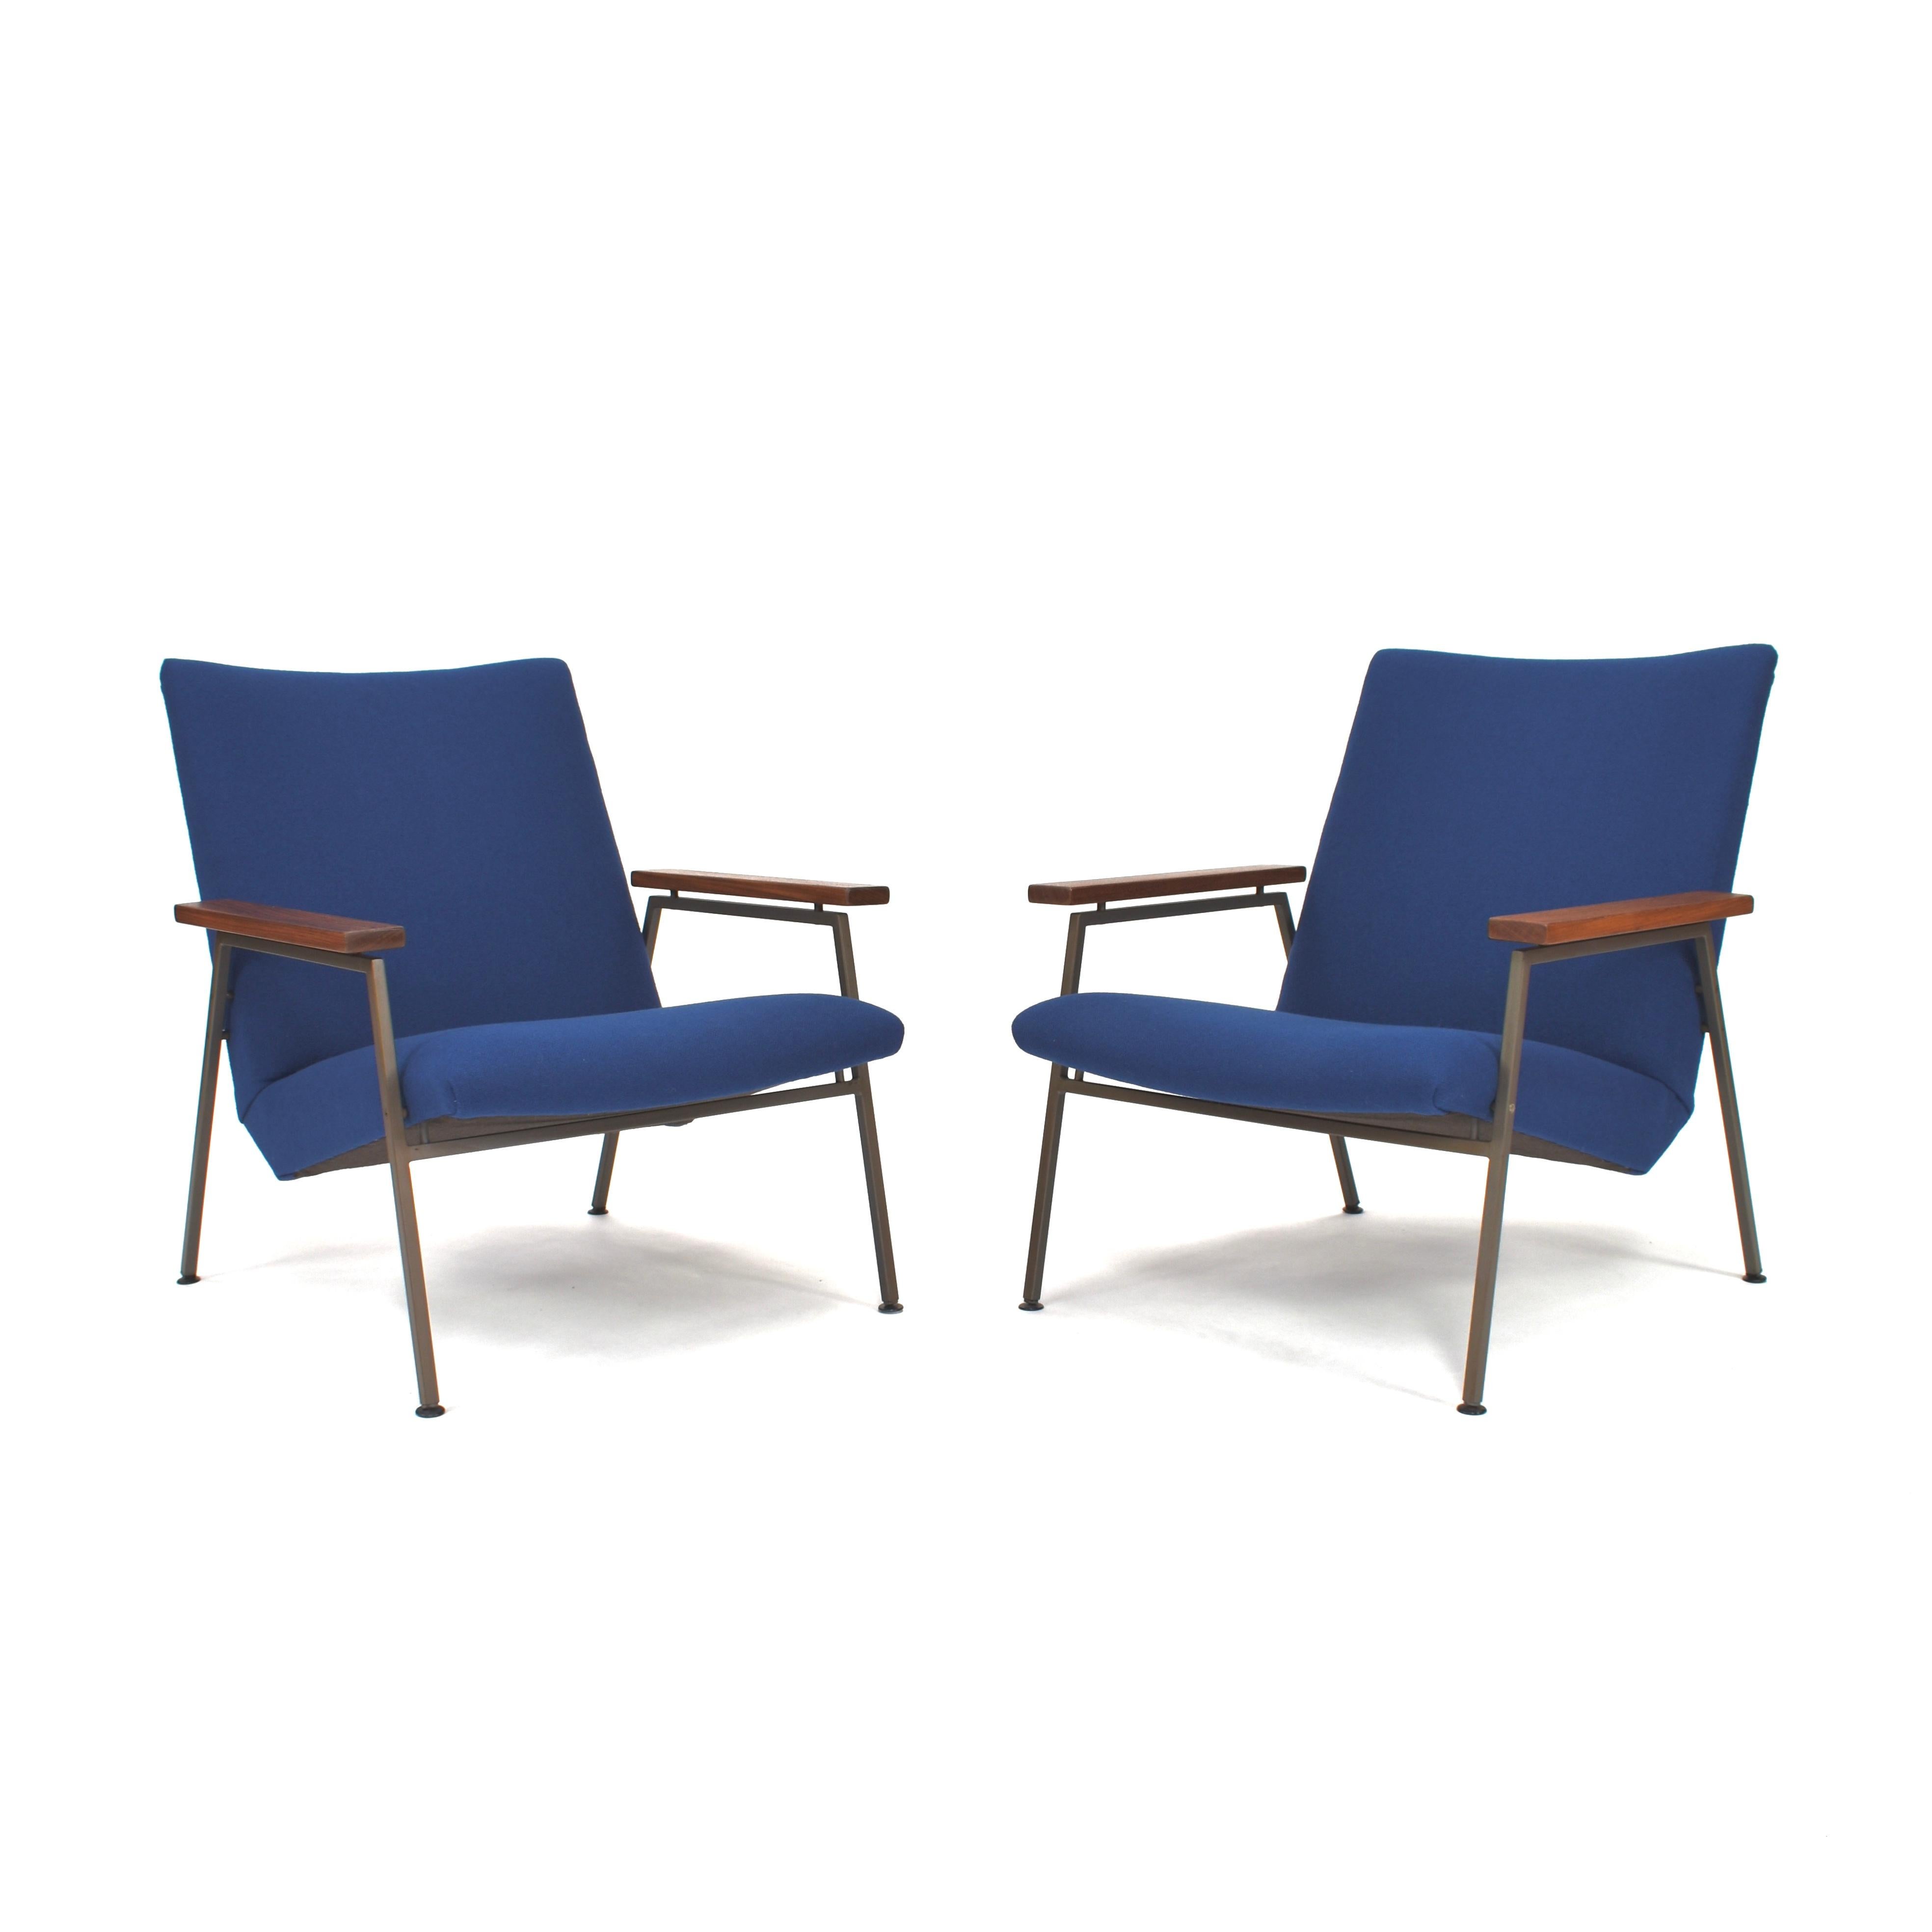 Mid-20th Century Pair of Rob Parry Lounge Armchairs with New Kvadrat Upholstery, circa 1950